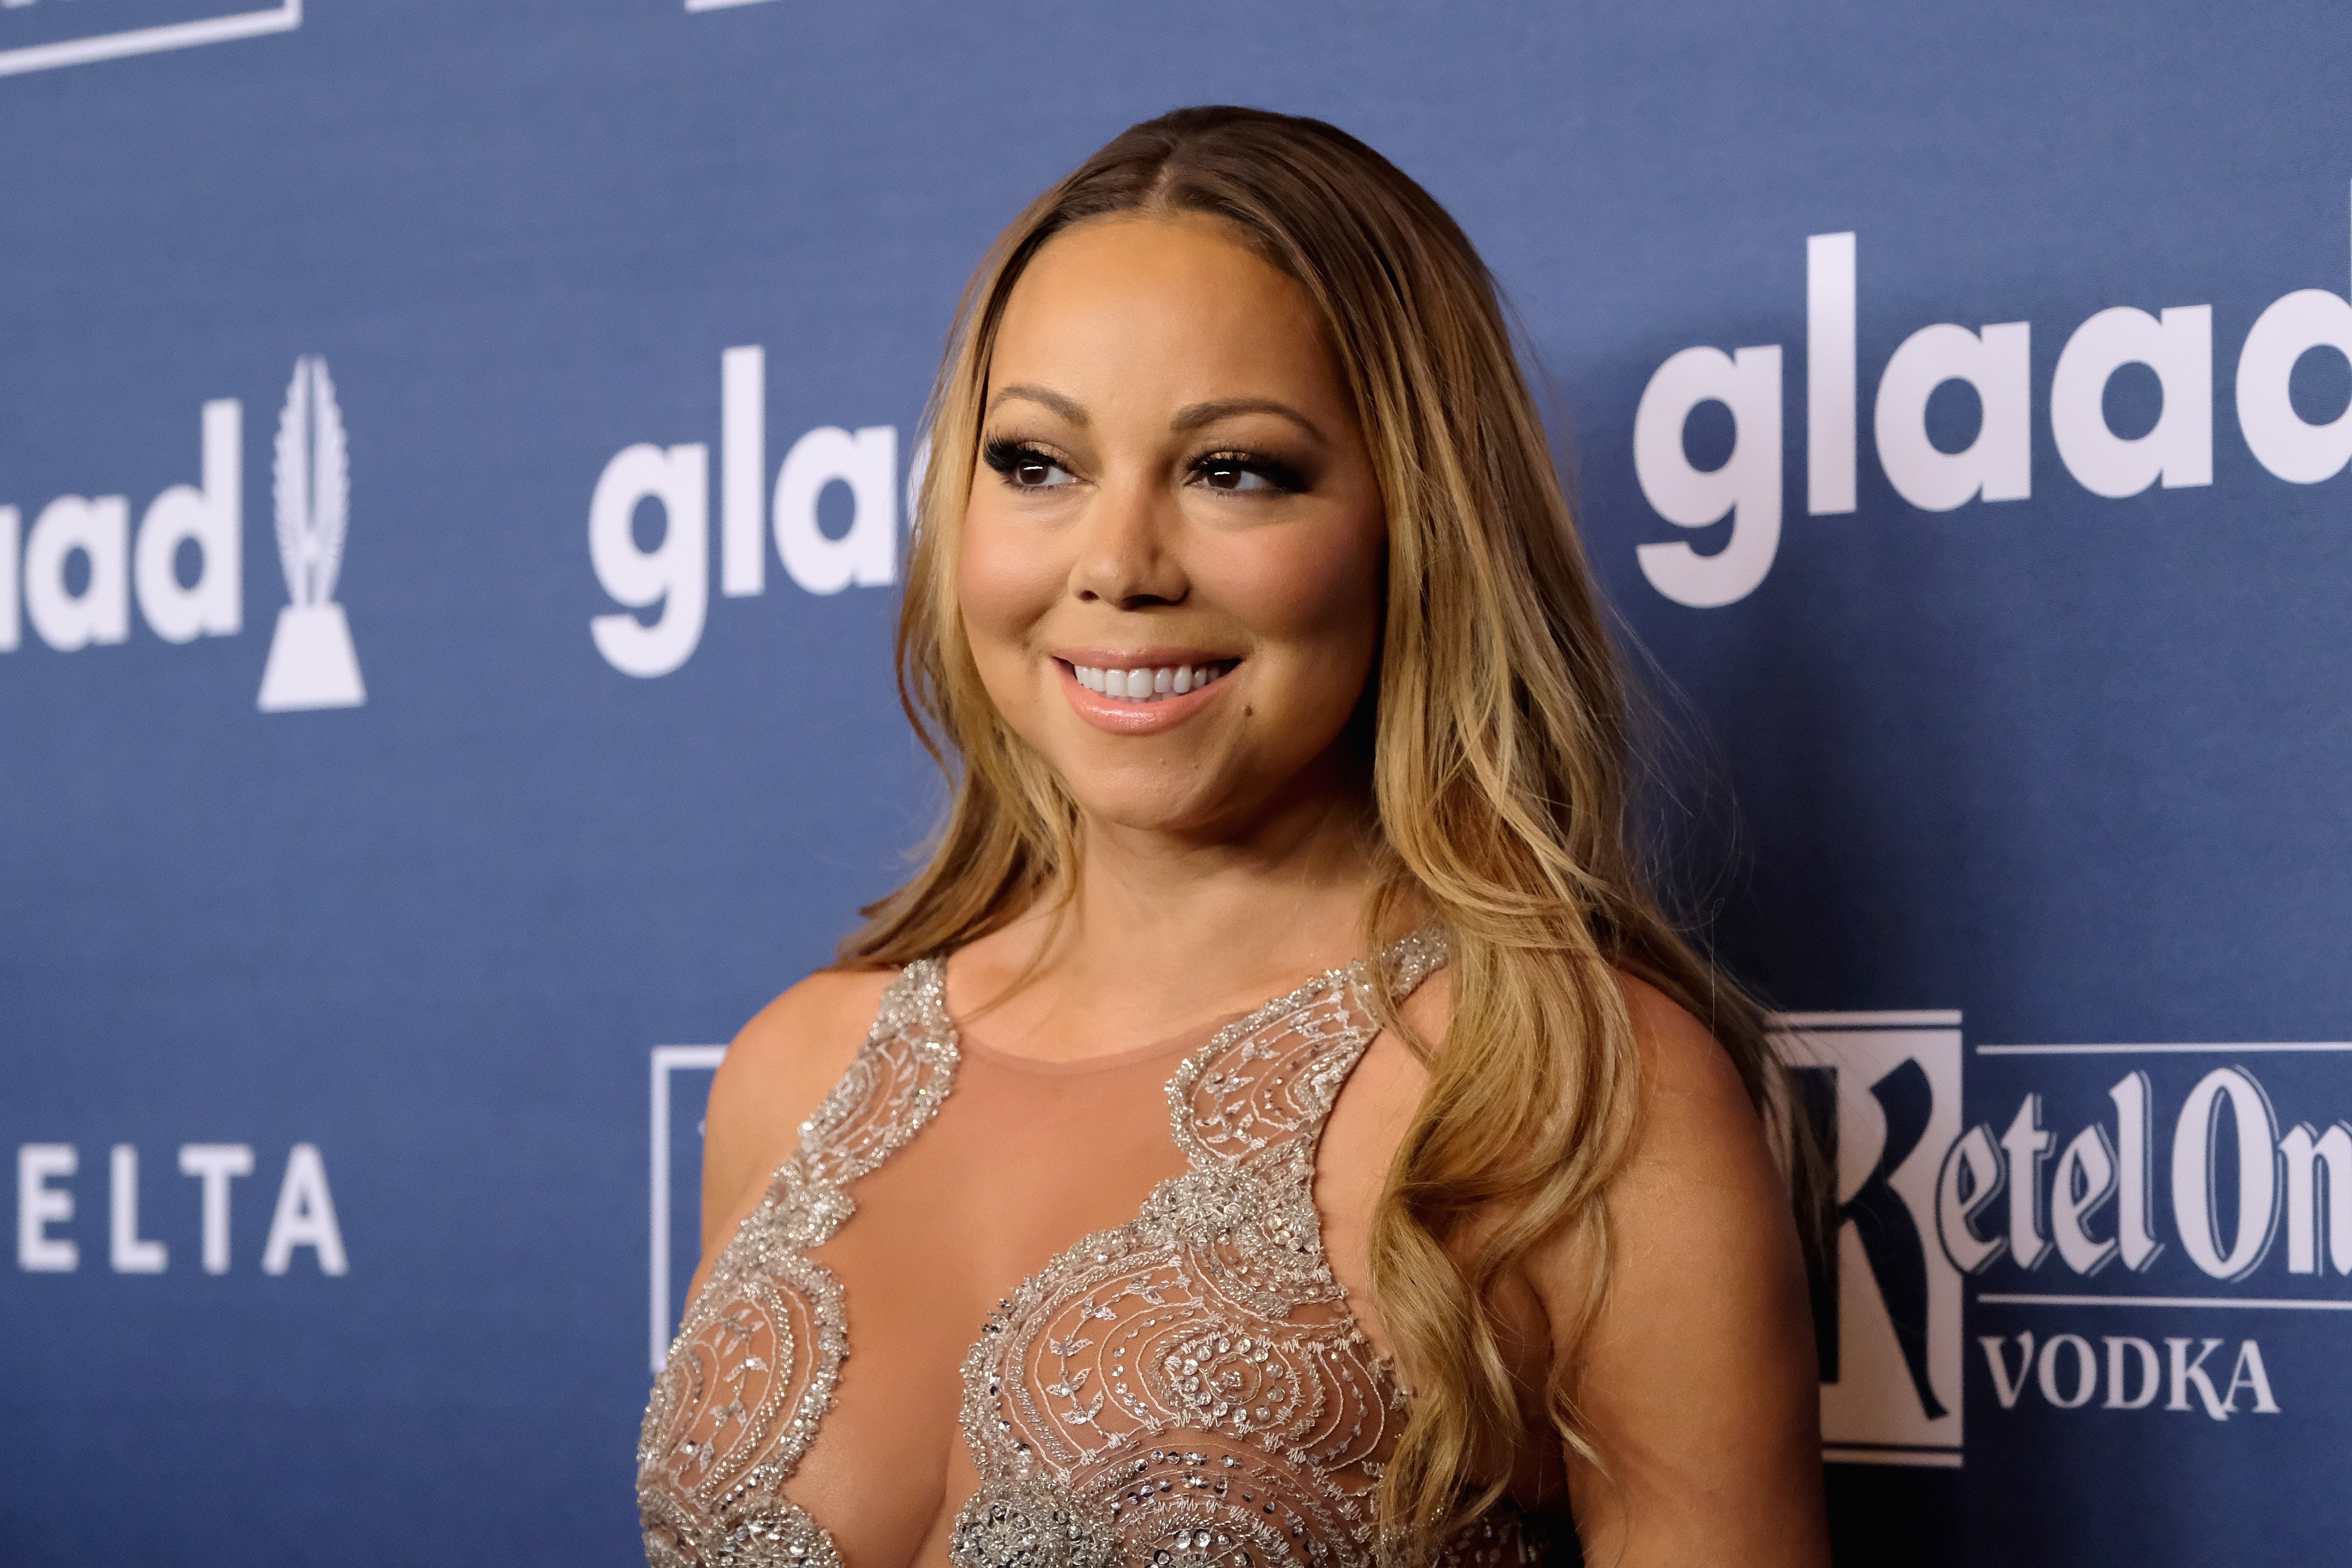 Mariah Carey attends at The 27th Annual GLAAD Media Awards with Hilton at Waldorf Astoria Hotel on May 14, 2016 in New York City. | Photo: GettyImages